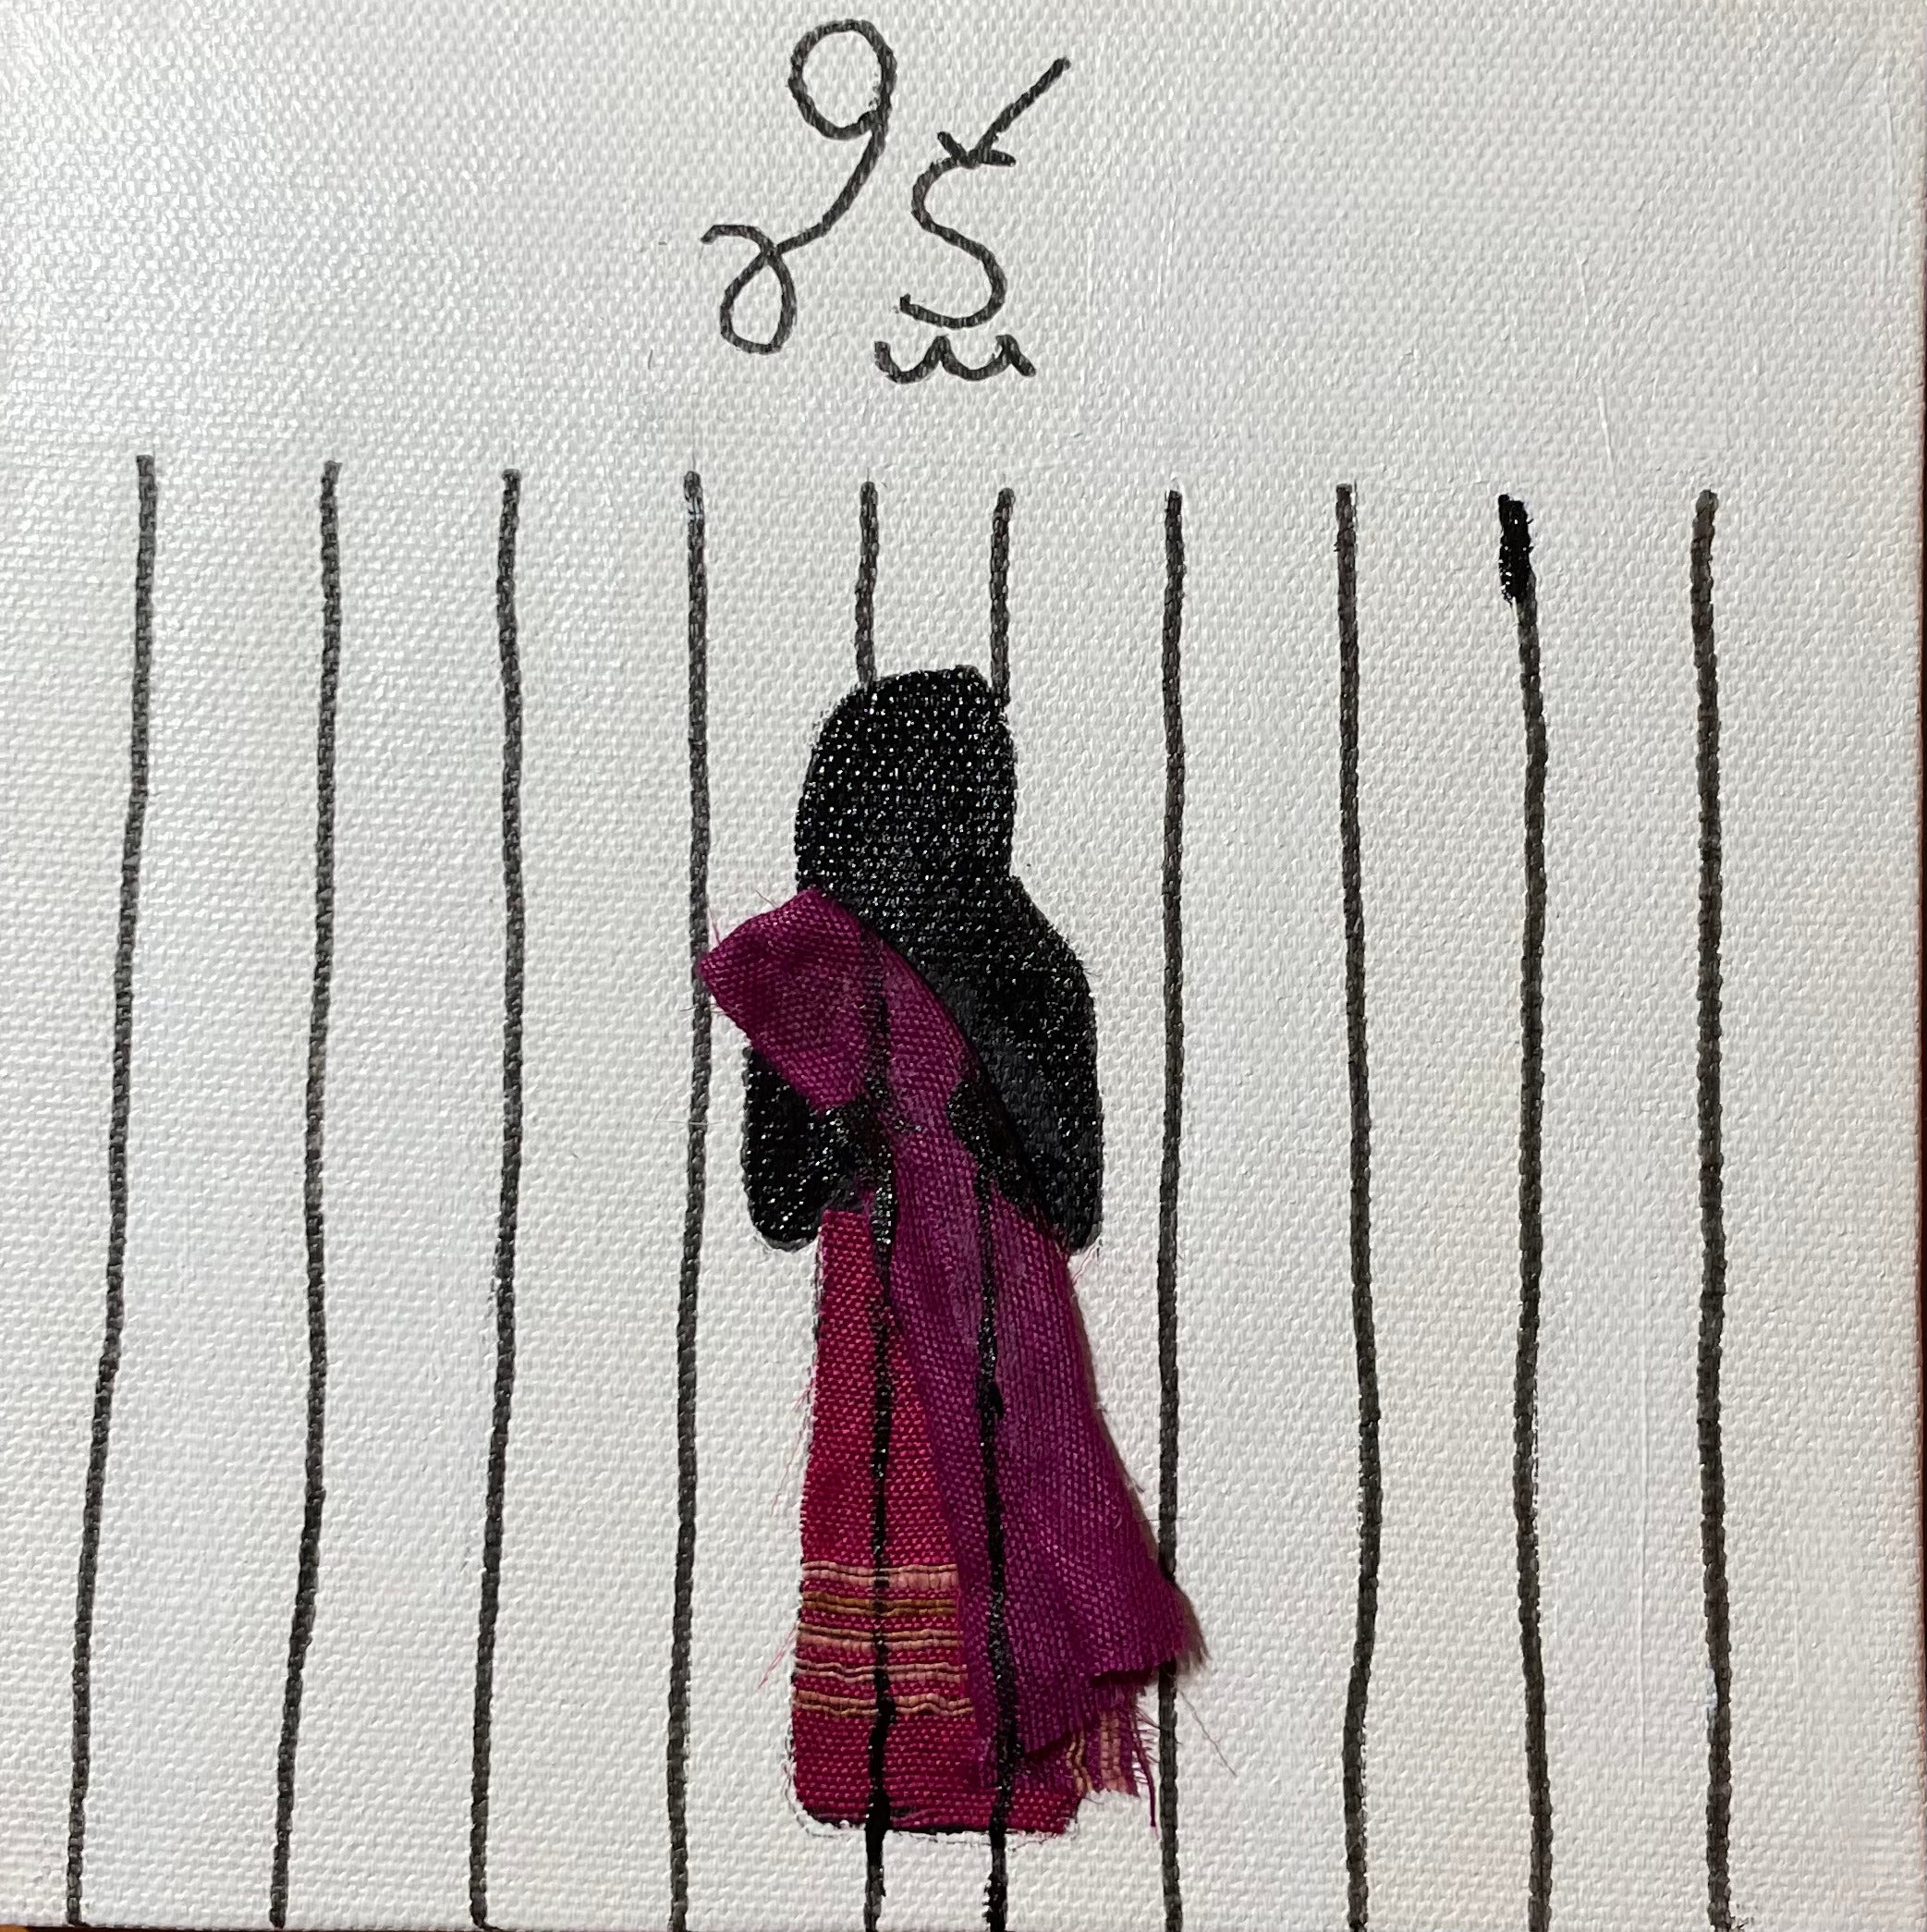 Visual representation of an Indian woman trapped behind bars. Her clothing is made of actual fabric. On top of the image, there is a caption in Telugu